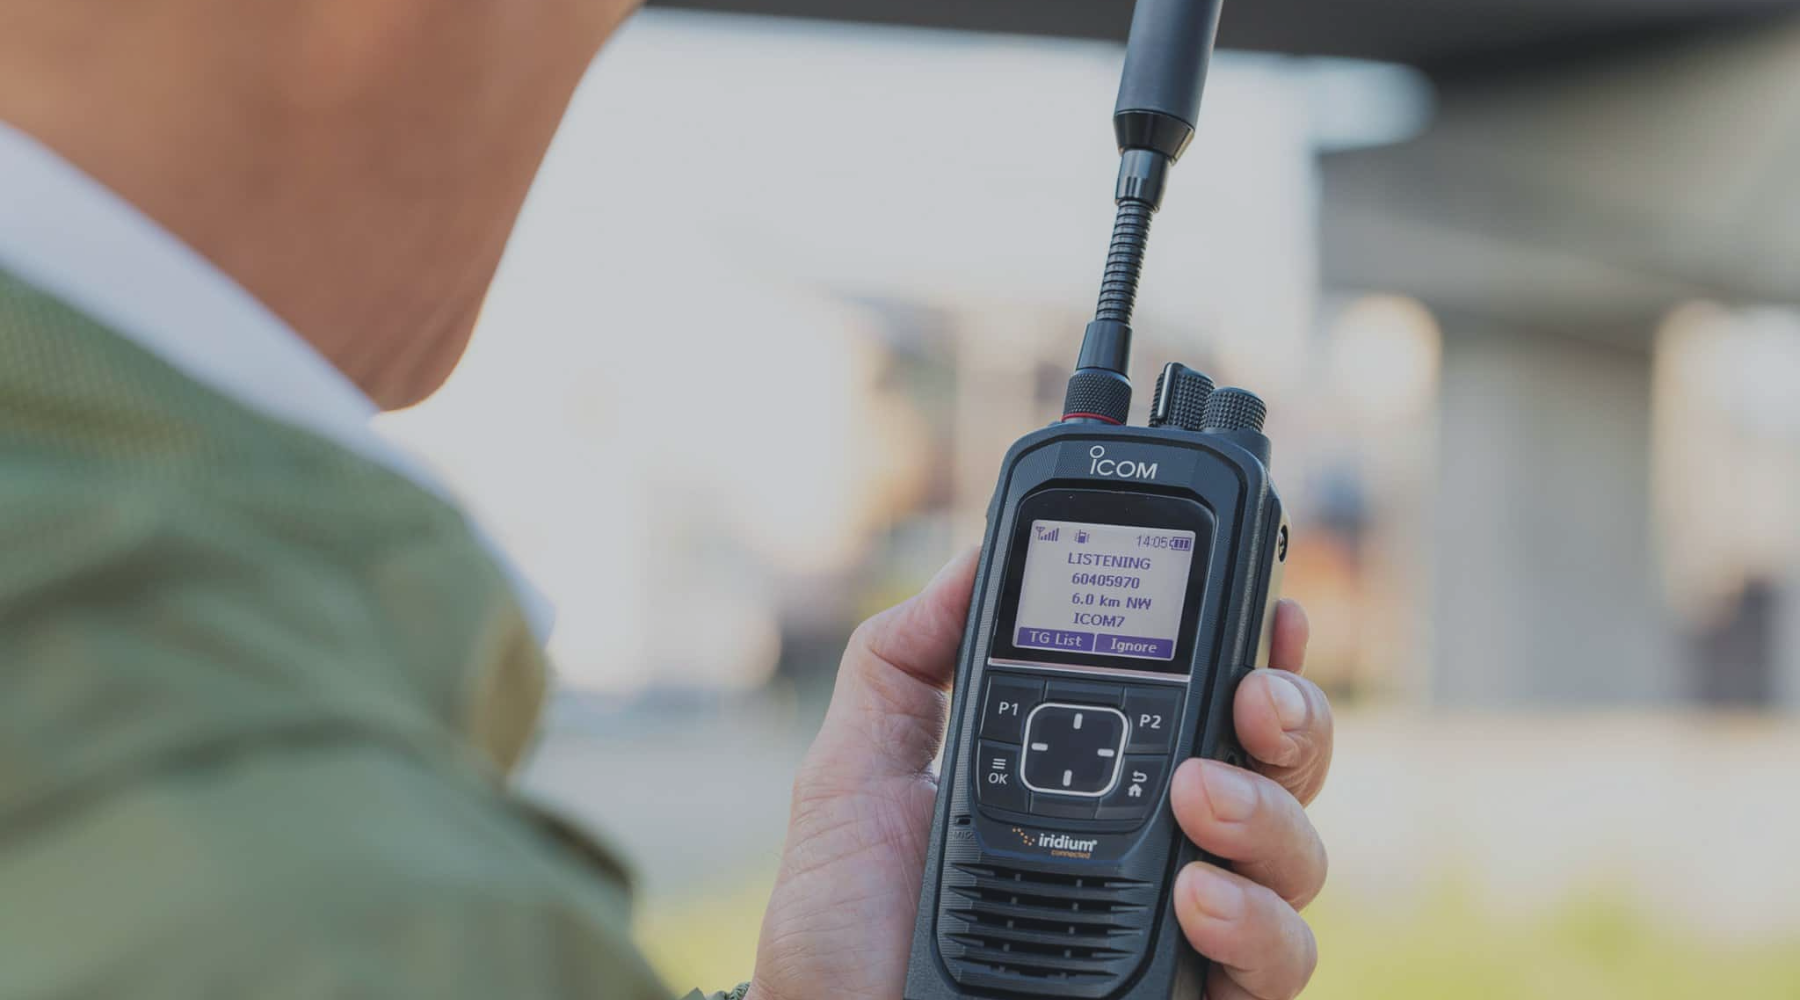 How to choose the right satellite phone? - E-SAT